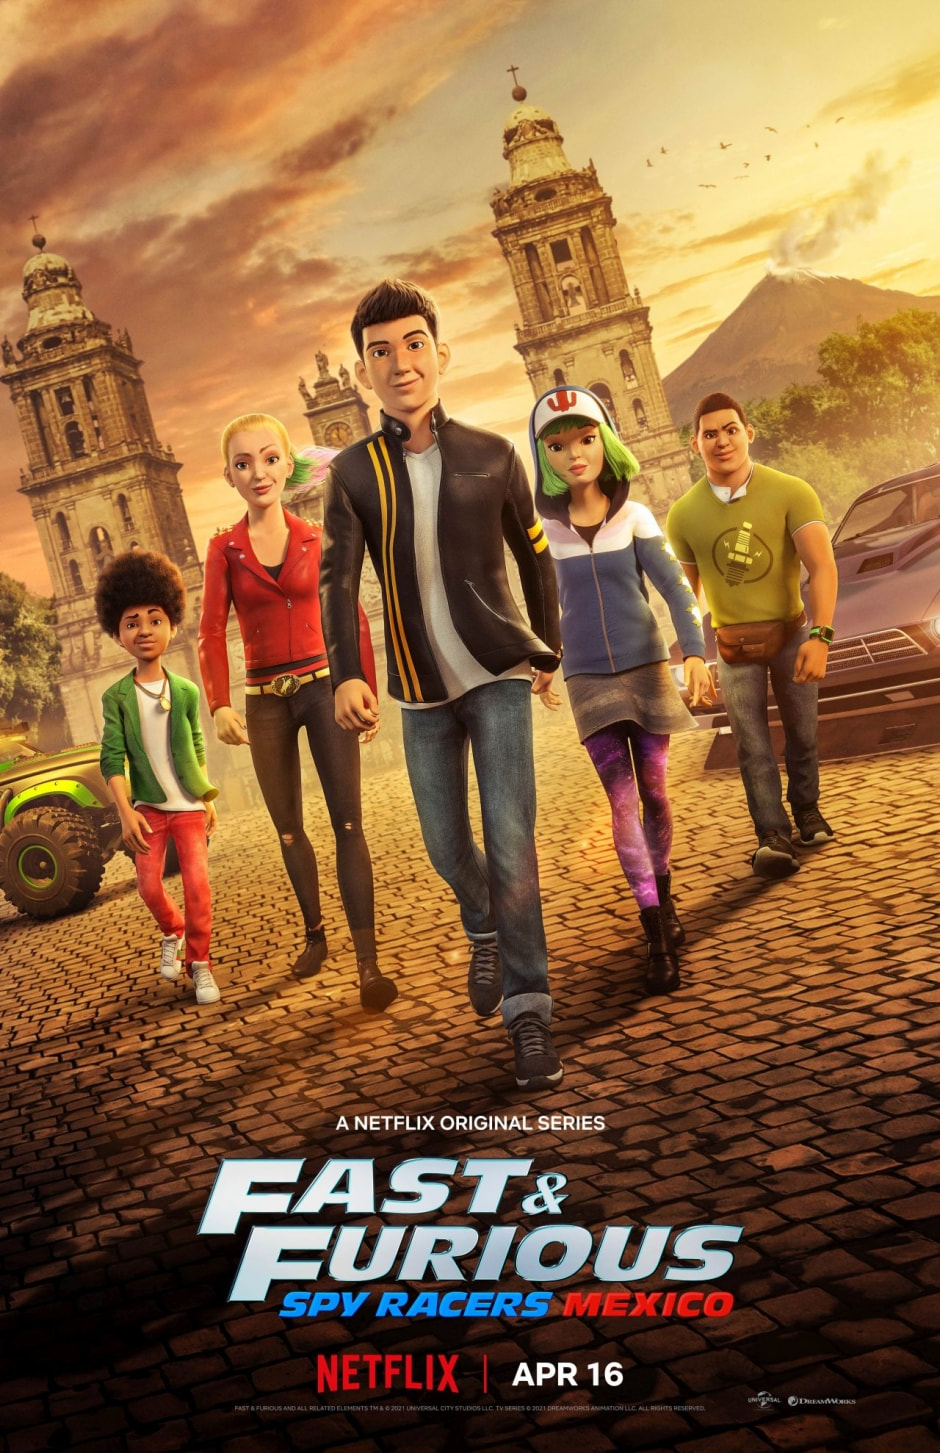 Fast & Furious: Spy Racers Mexico premieres on Netflix on April 16